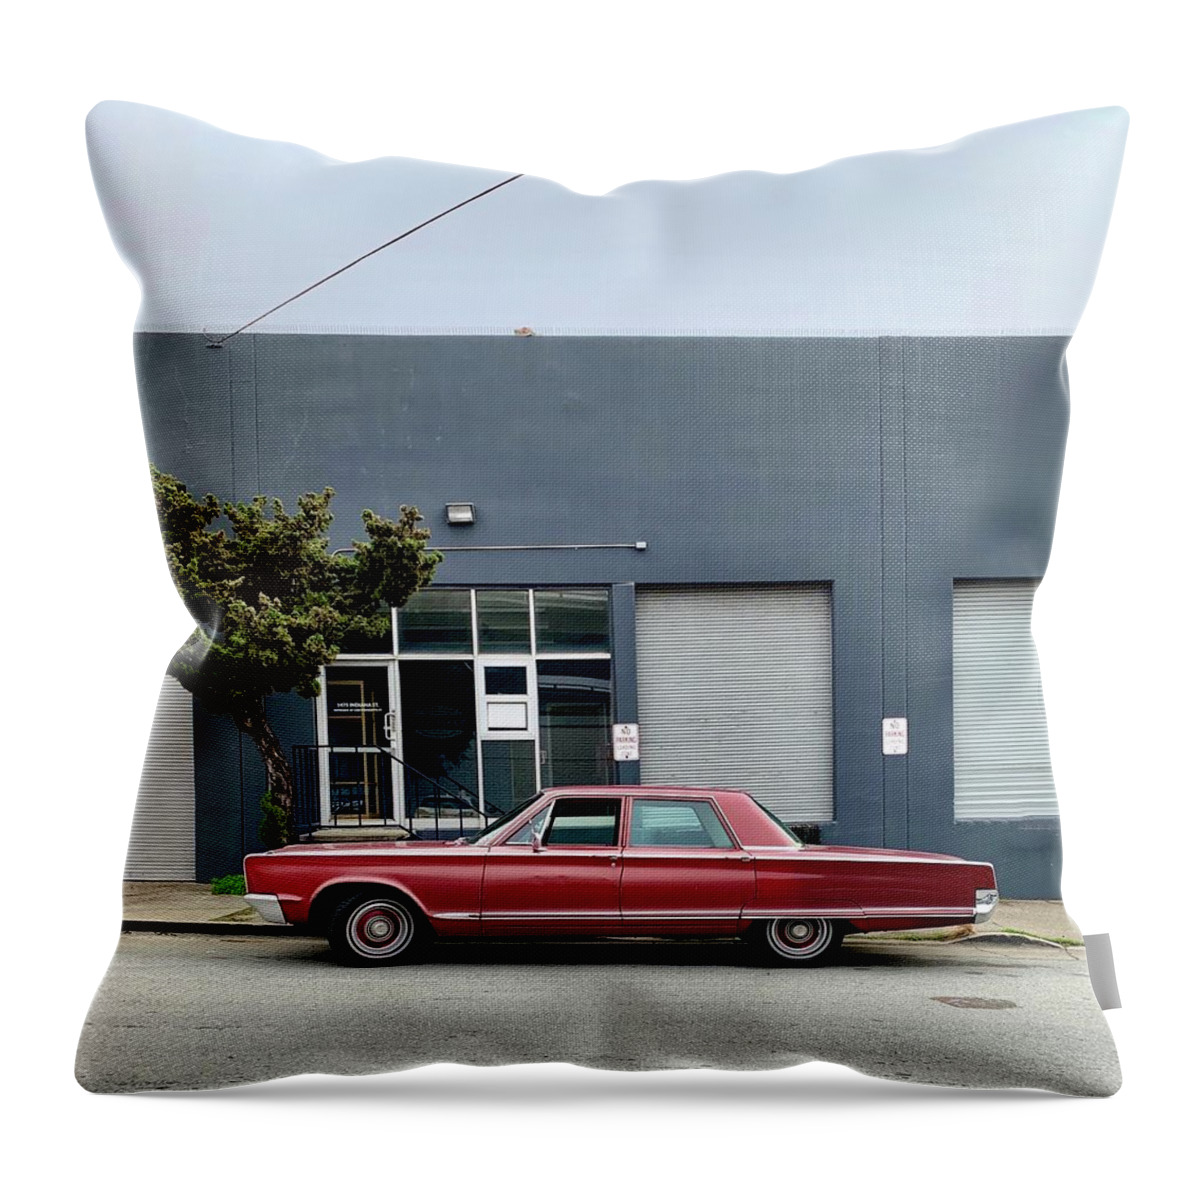  Throw Pillow featuring the photograph Red Vintage Car by Julie Gebhardt